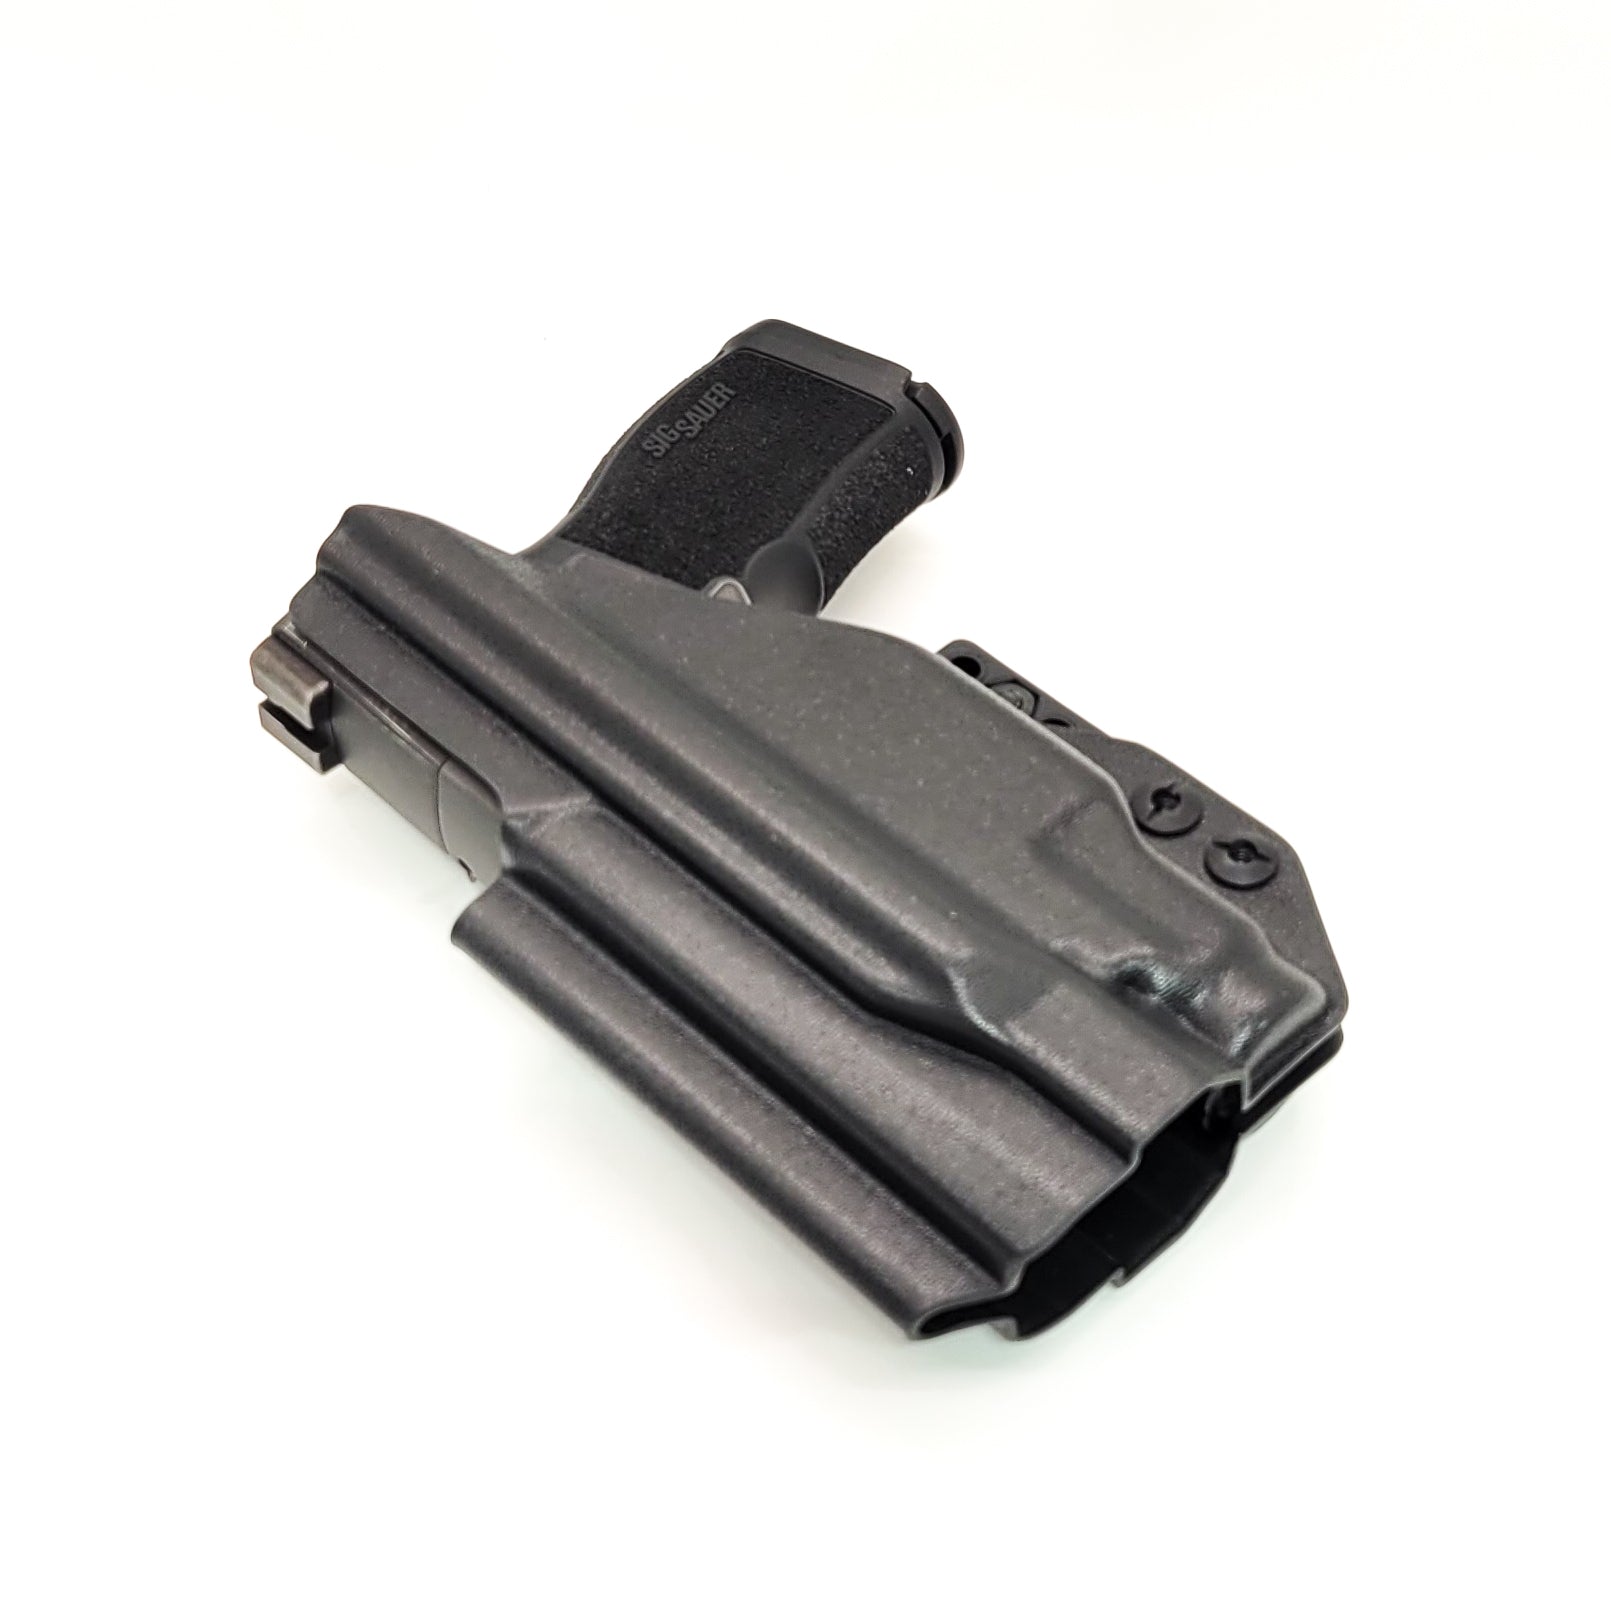 Inside waistband kydex holster designed to fit the Sig Sauer P365 or P365XL pistol with the Tactical Development Pro Ledge Tactical Application Rail and Streamlight TLR-7 Sub on the weapon. This holster will fit the Sig P365, P365X, P365XL Spectre, P365 XL RomeoZero, P365X RomeoZero, P365 SAS and P365XL Spectre Comp.